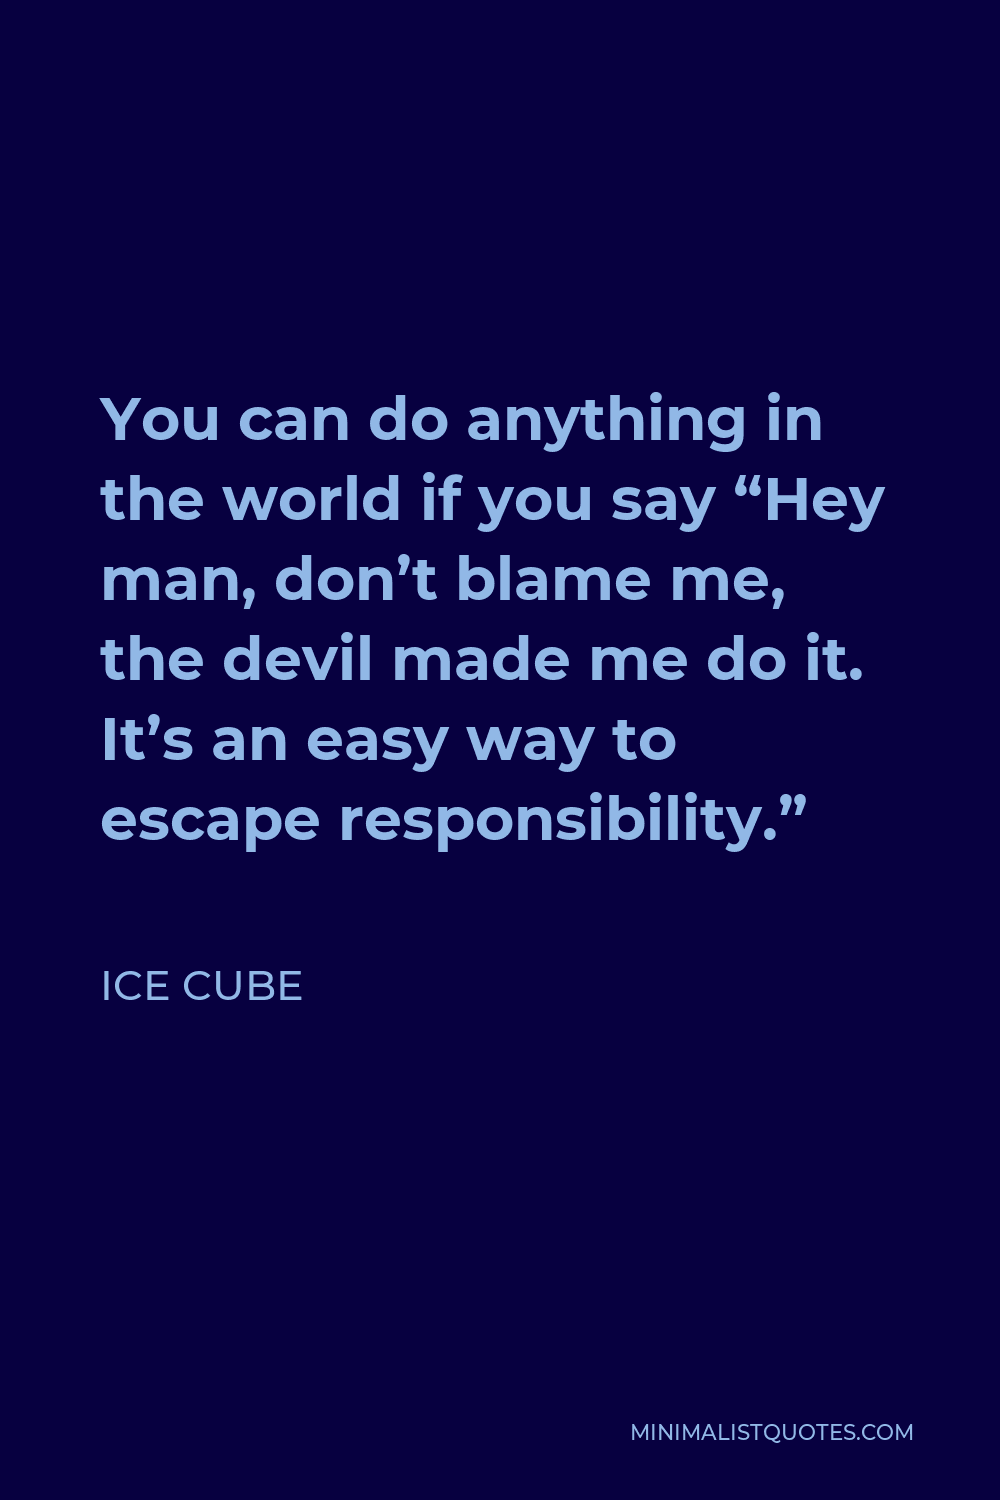 Ice Cube Quote - You can do anything in the world if you say “Hey man, don’t blame me, the devil made me do it. It’s an easy way to escape responsibility.”